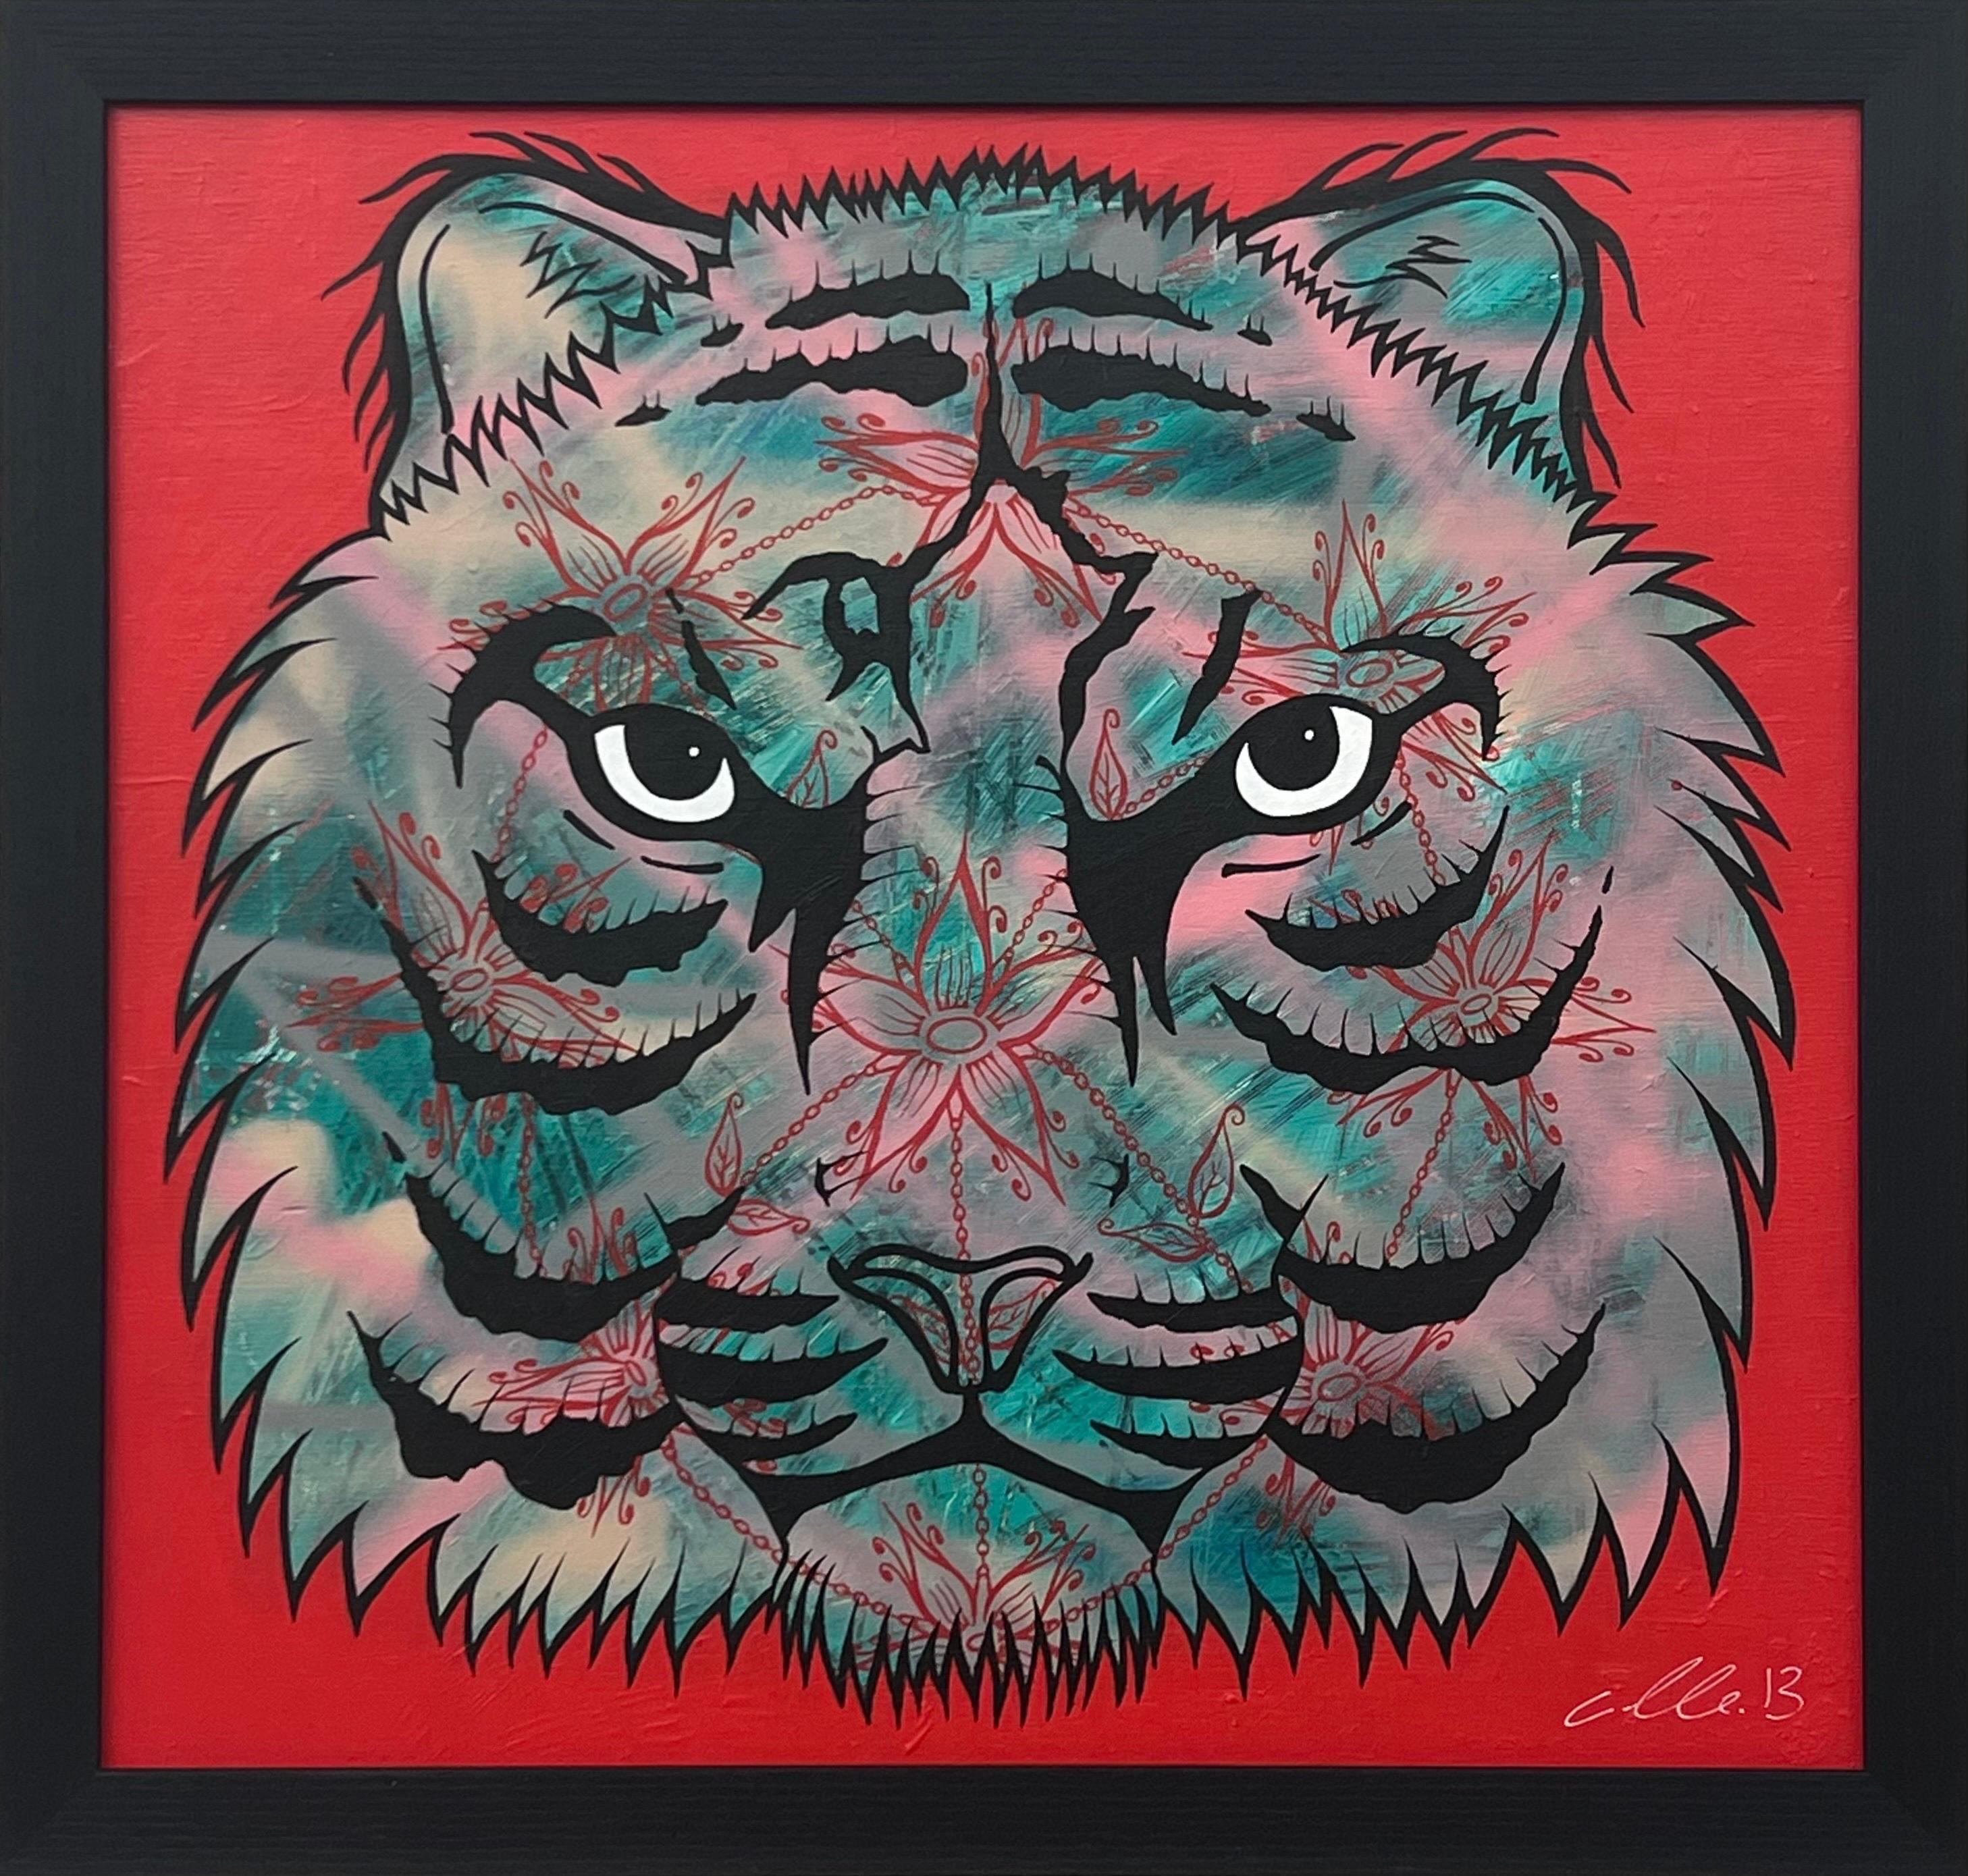 Tiger Portrait Pop Art with Floral Mandala in Chains by British Graffiti Artist